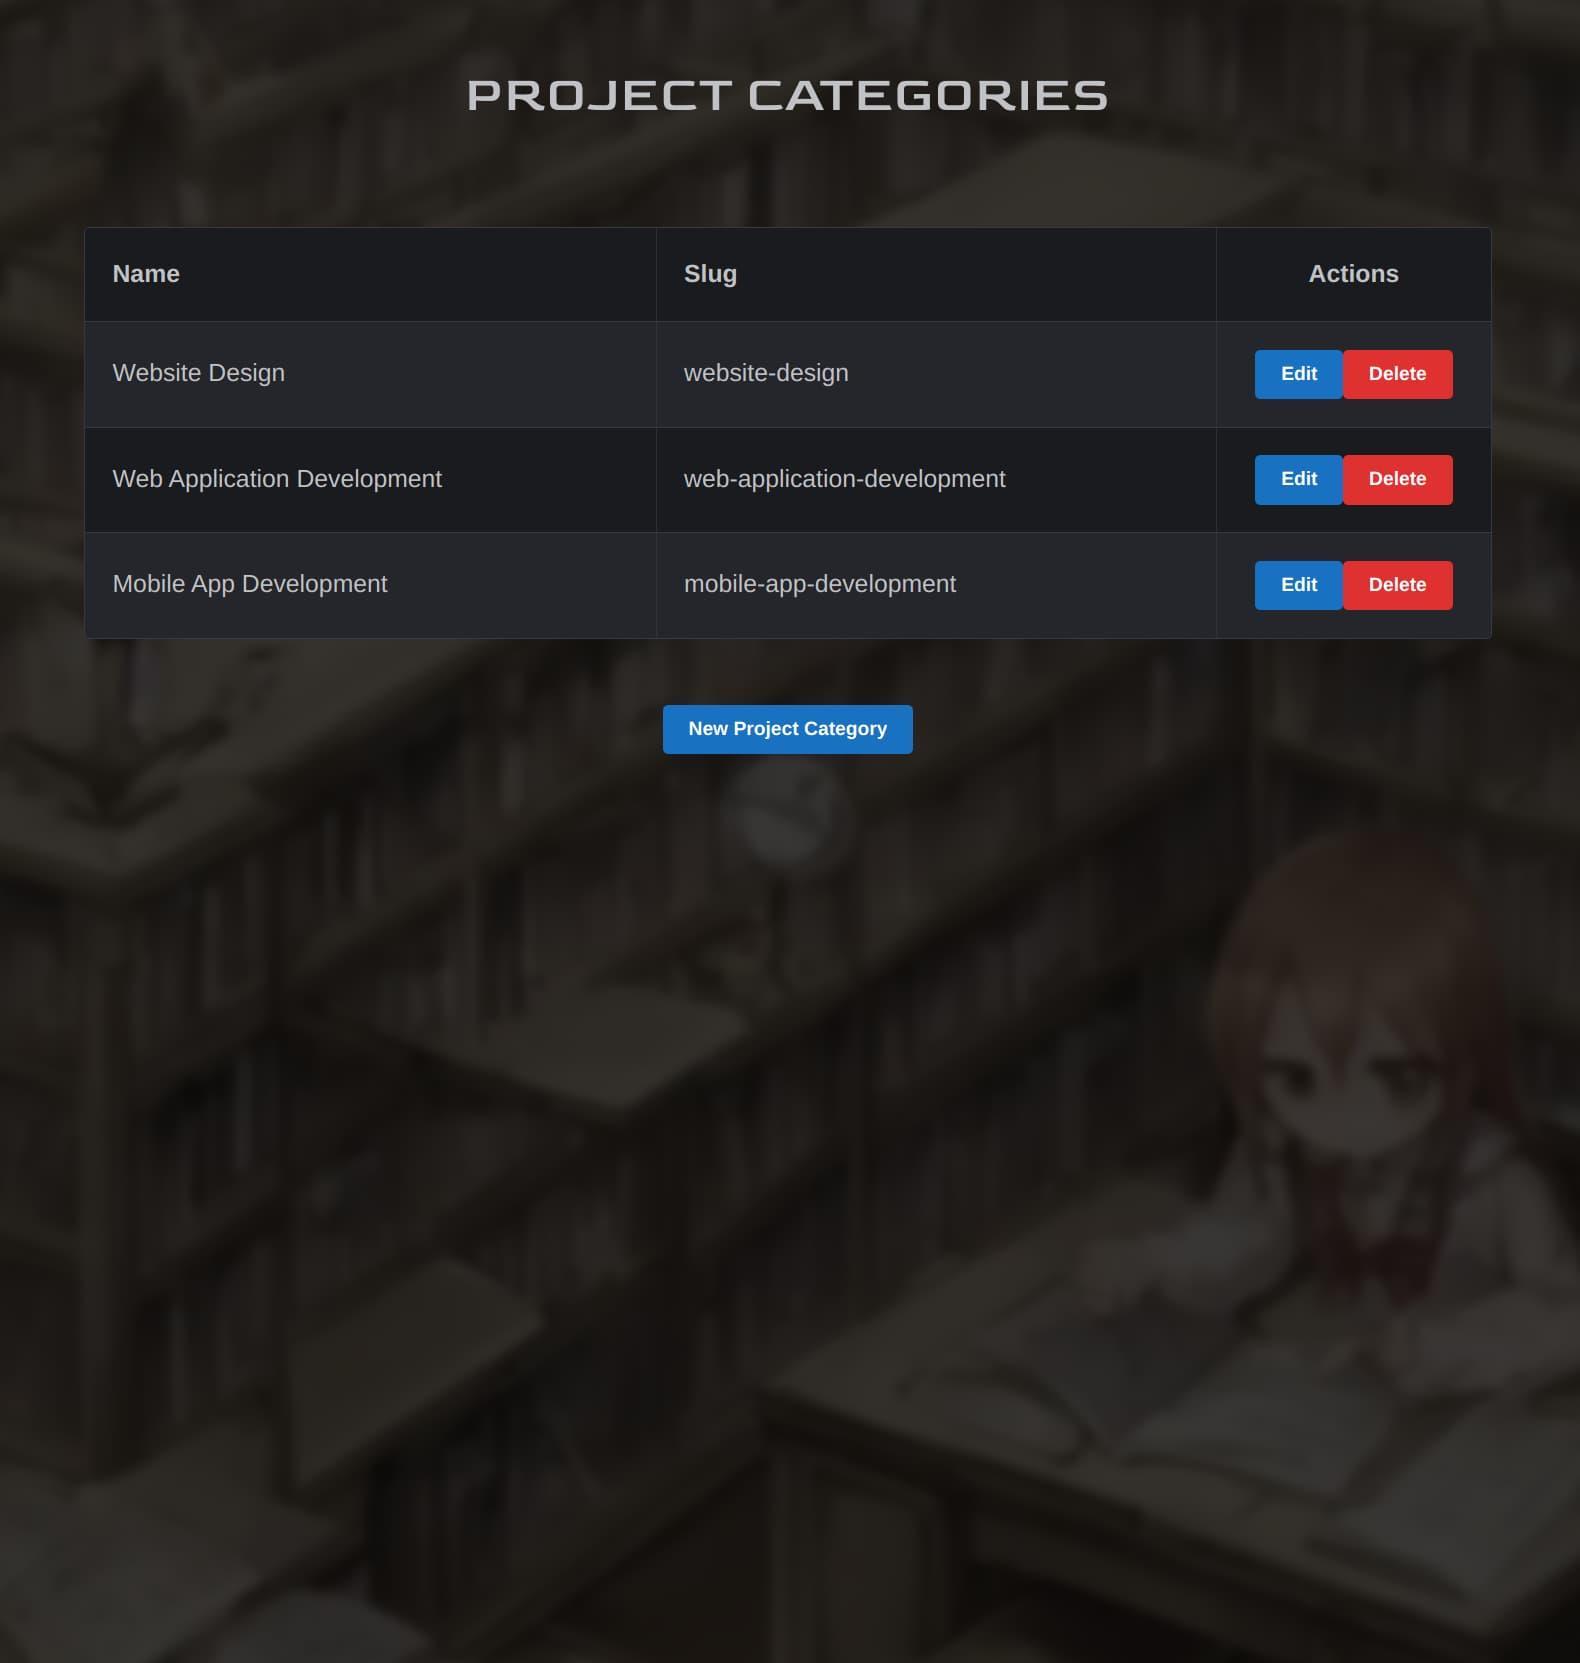 The project categories page displays company project categories, with a name and a slug each. There are edit/delete buttons beside each category, and a 'New Project Category' button at the bottom